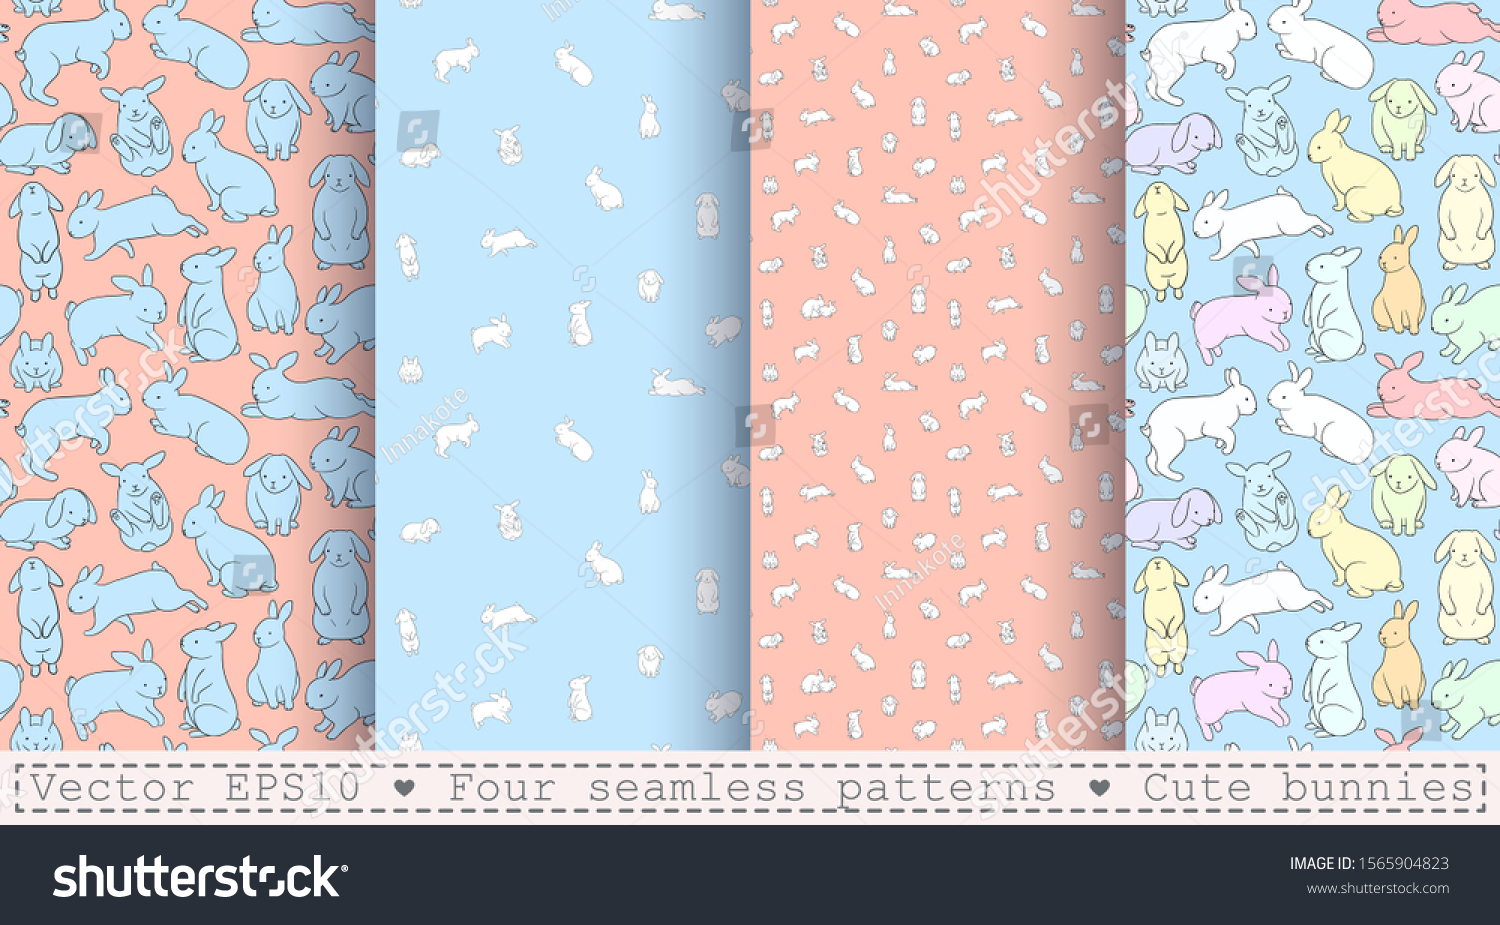 SVG of Four seamless patterns with cute bunnies. Cartoon white, bluee rabbits on a coral, skyey backgrounds. Linear, outline drawing. svg